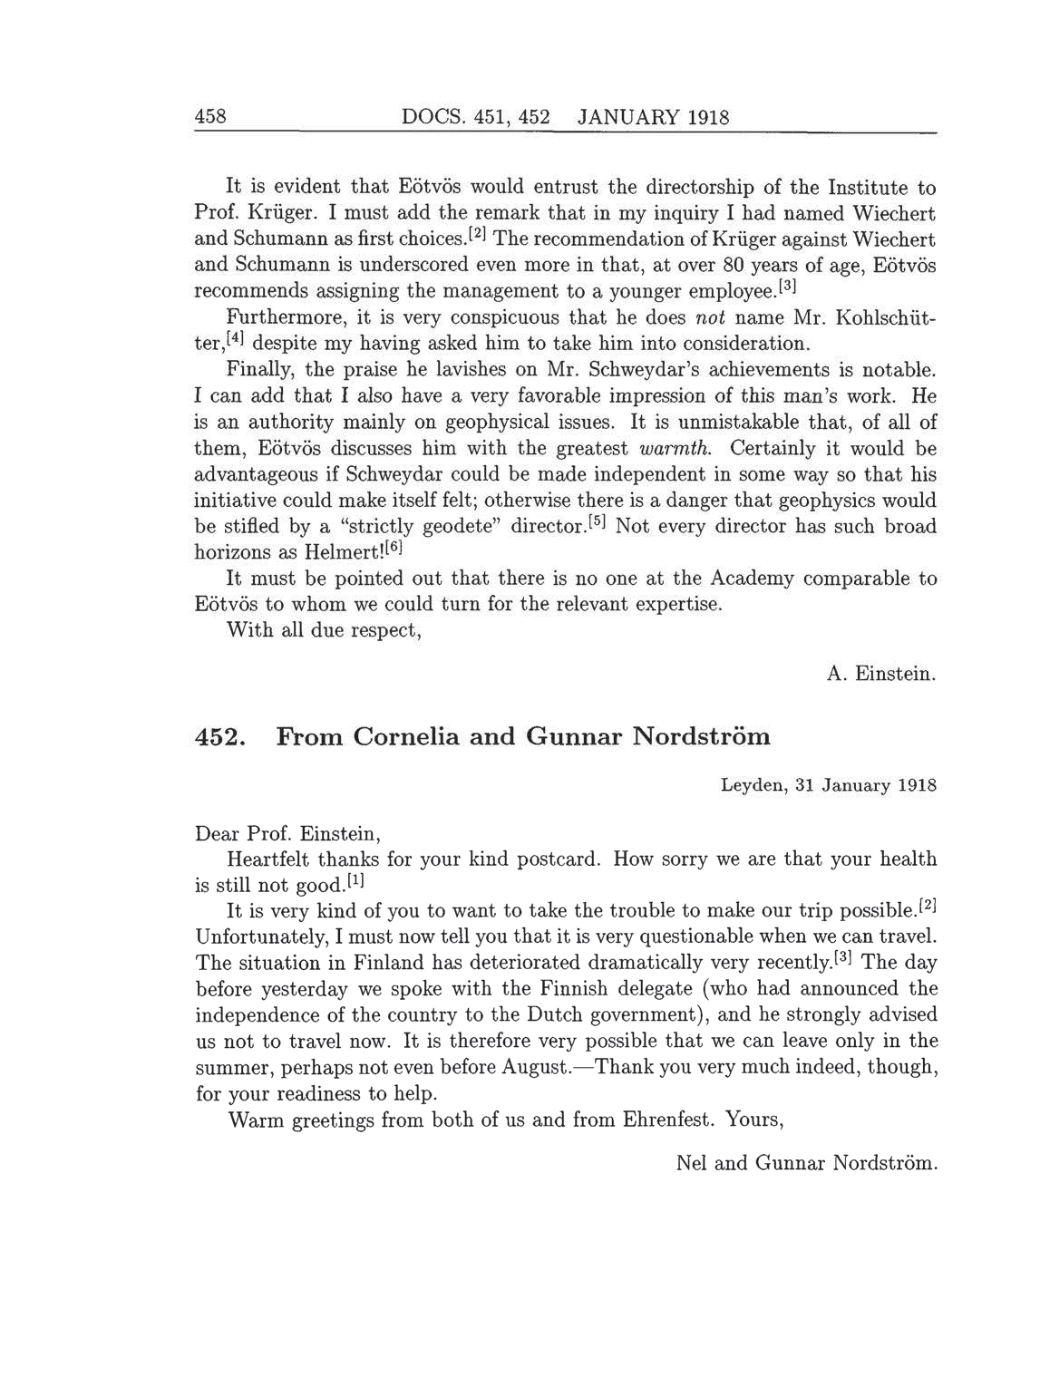 Volume 8: The Berlin Years: Correspondence, 1914-1918 (English translation supplement) page 458